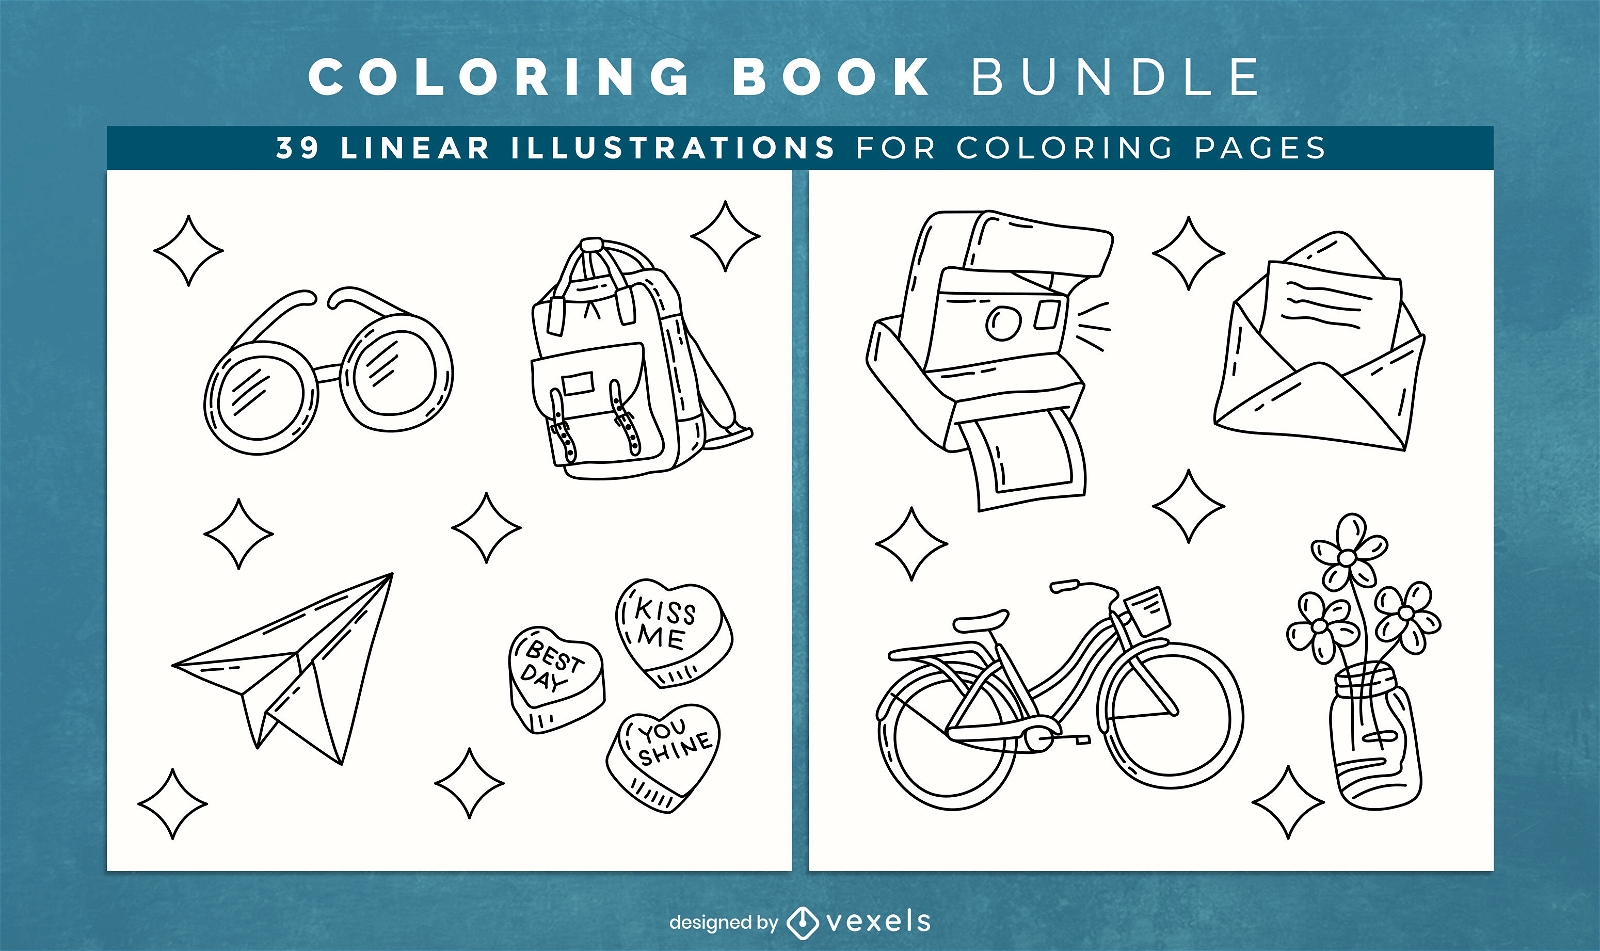 Cool objects coloring book interior design